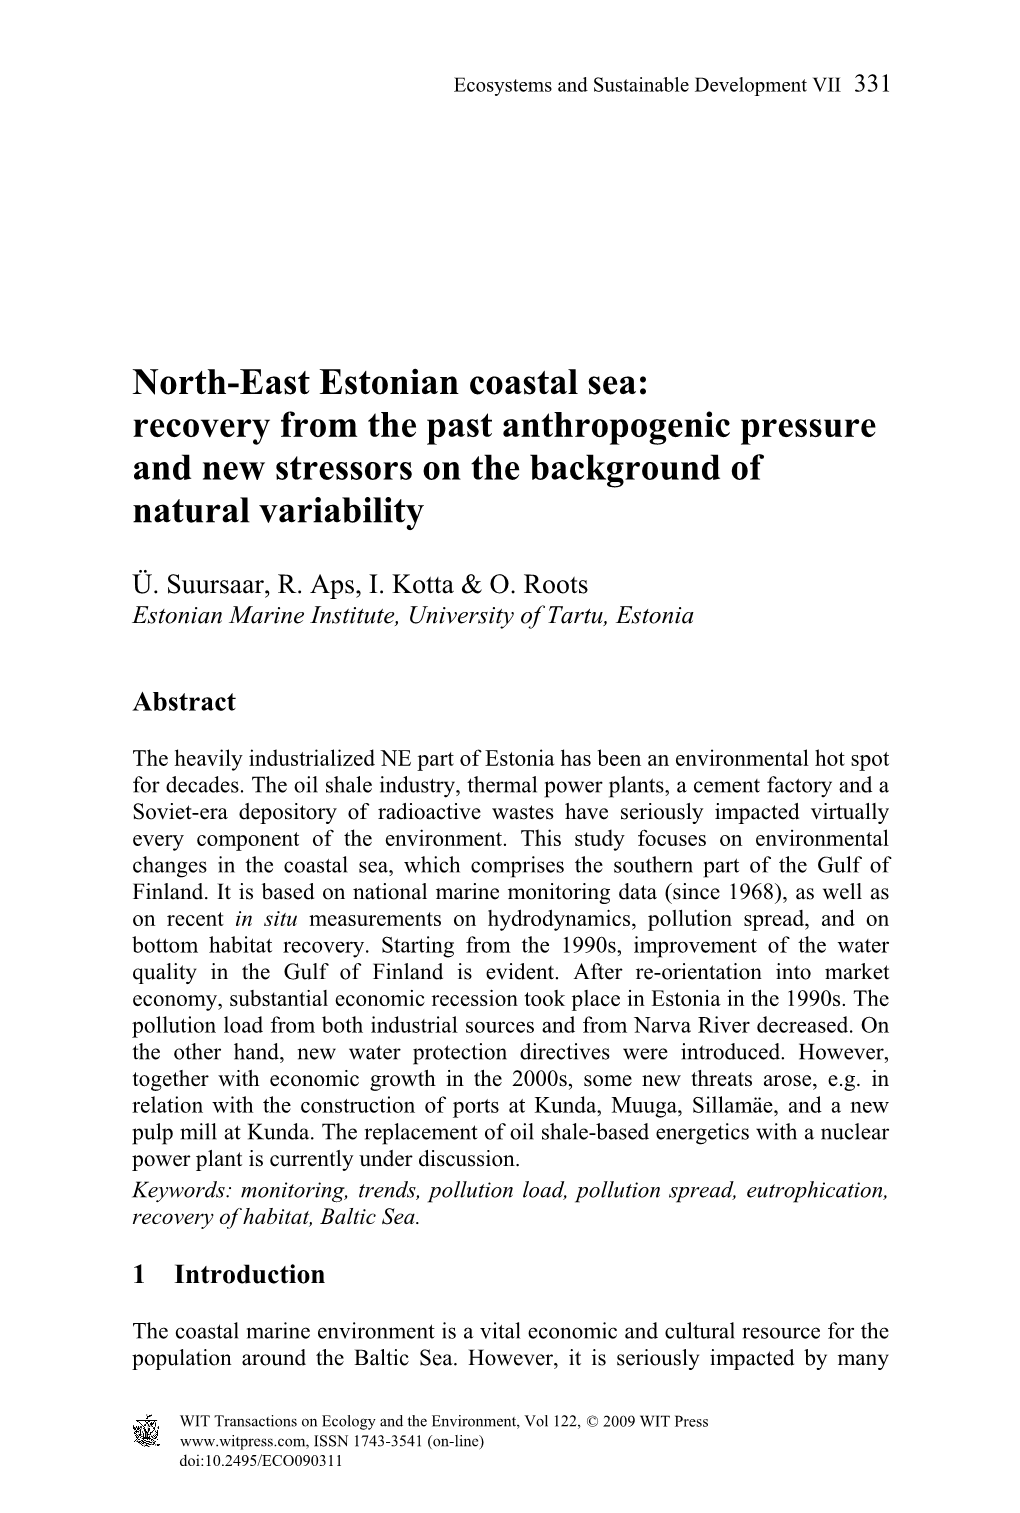 North-East Estonian Coastal Sea: Recovery from the Past Anthropogenic Pressure and New Stressors on the Background of Natural Variability